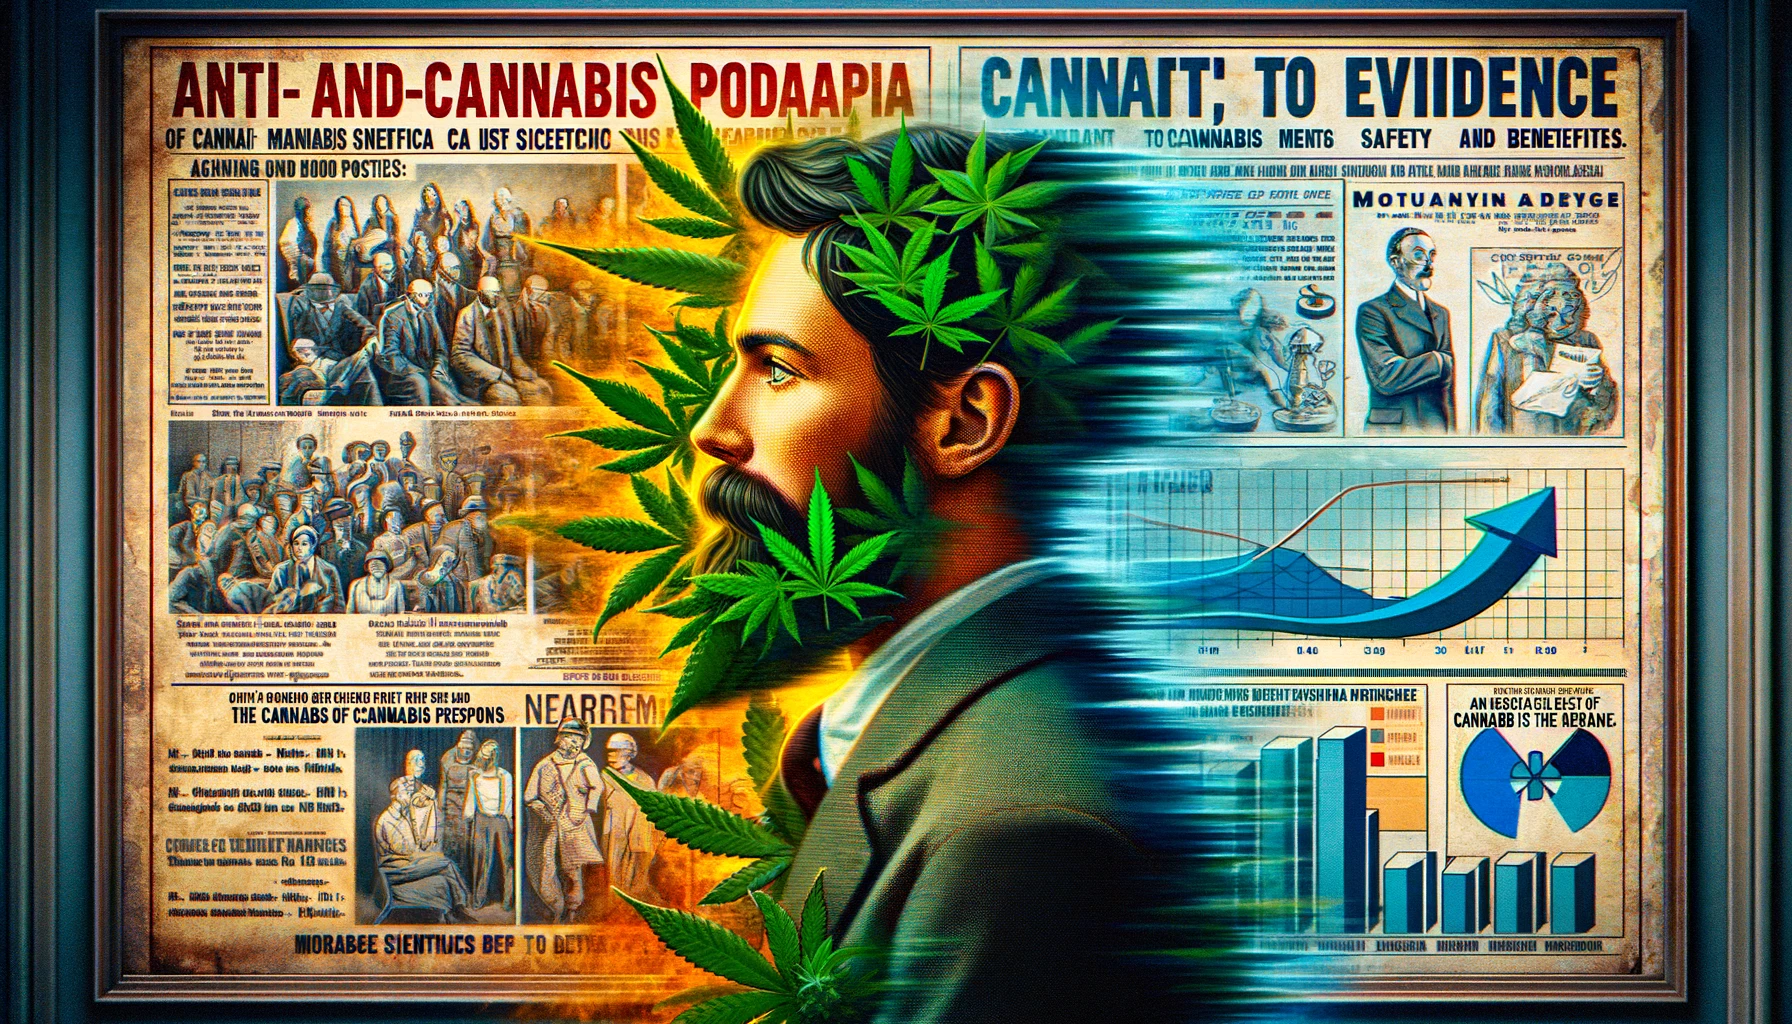 An artistic depiction of old anti-cannabis propaganda posters fading into modern scientific charts and graphs supporting cannabis.